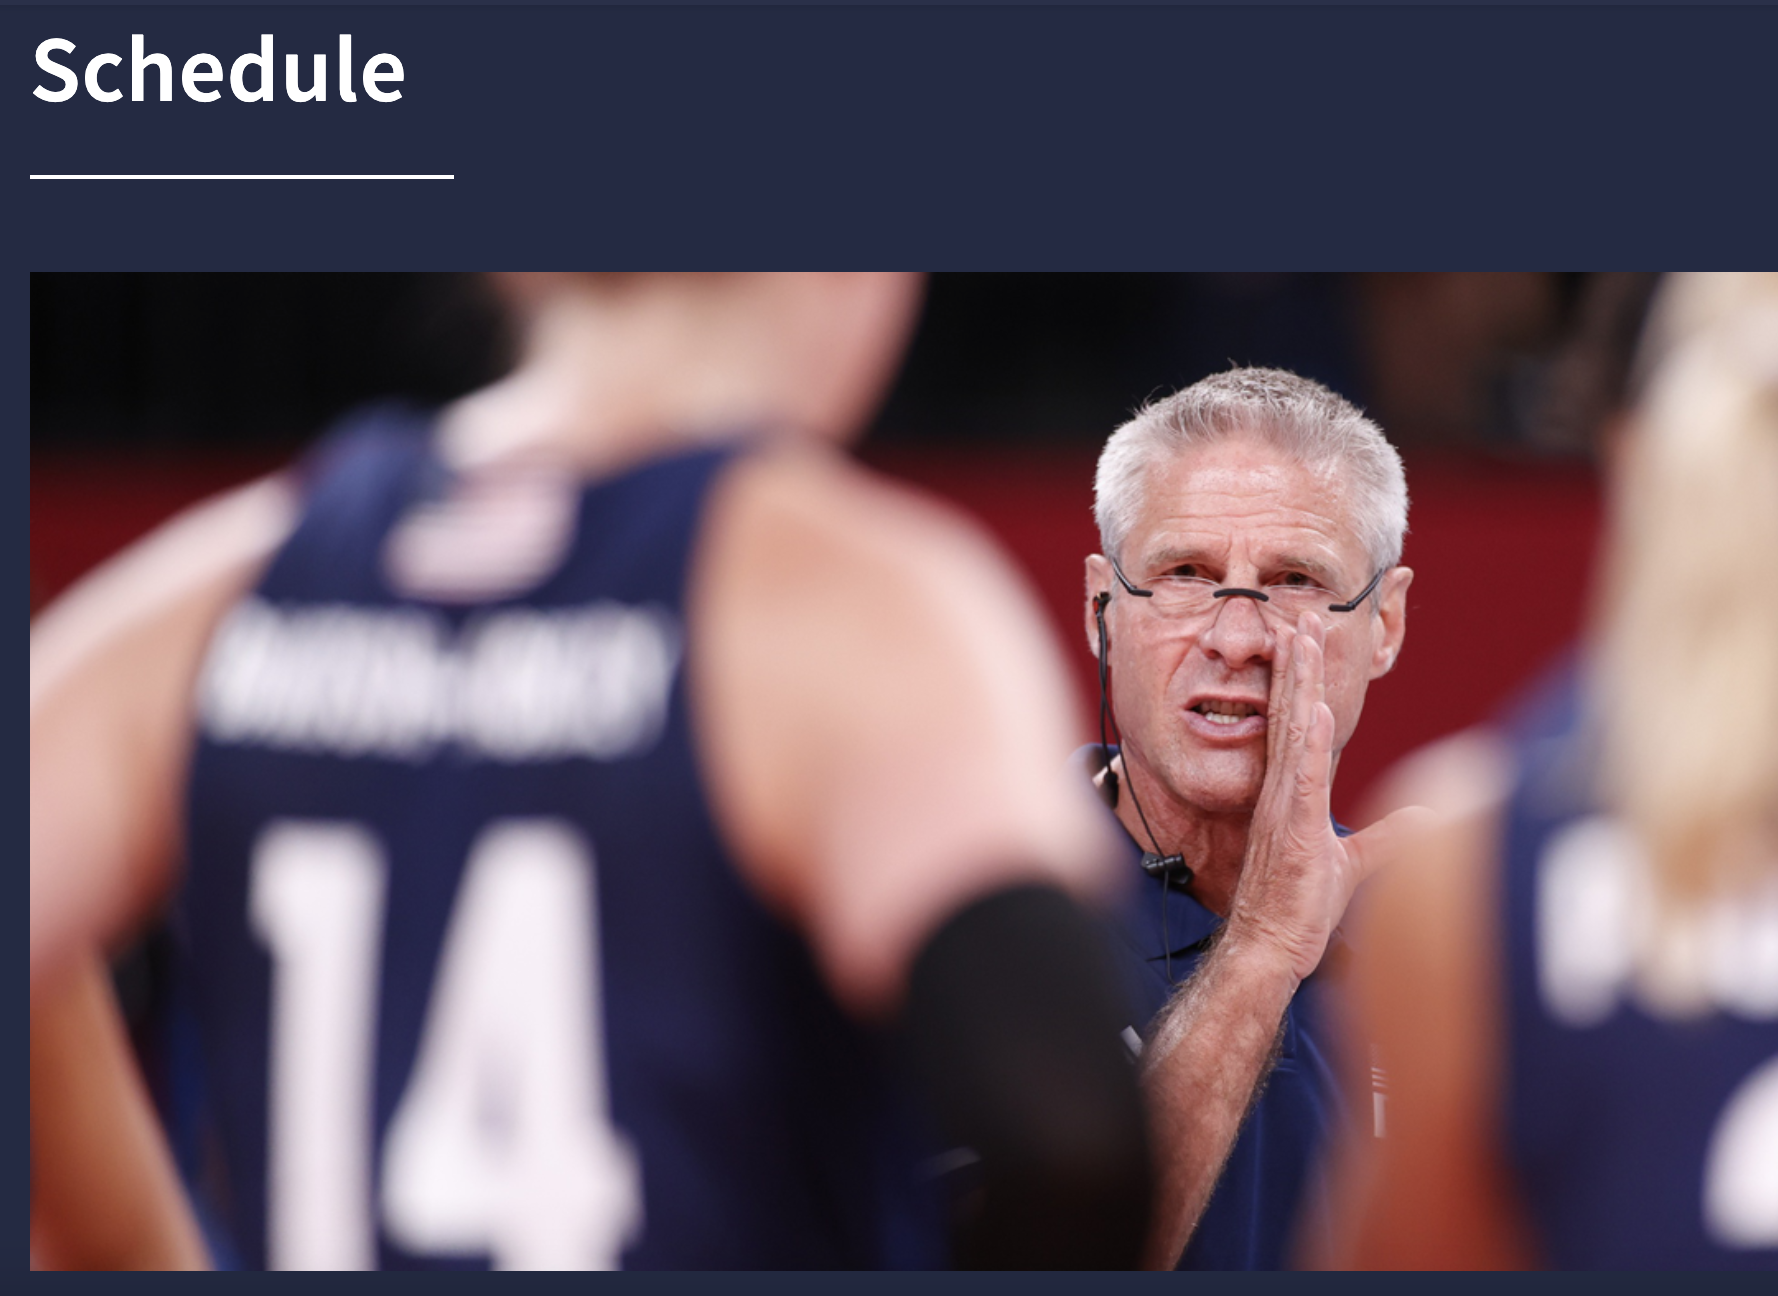 Screenshot of UCLA 2024 Paris Olympics website featuring the heading Schedule and white man with glasses, Karch Kiraly, saying something in confidence to a player on the court